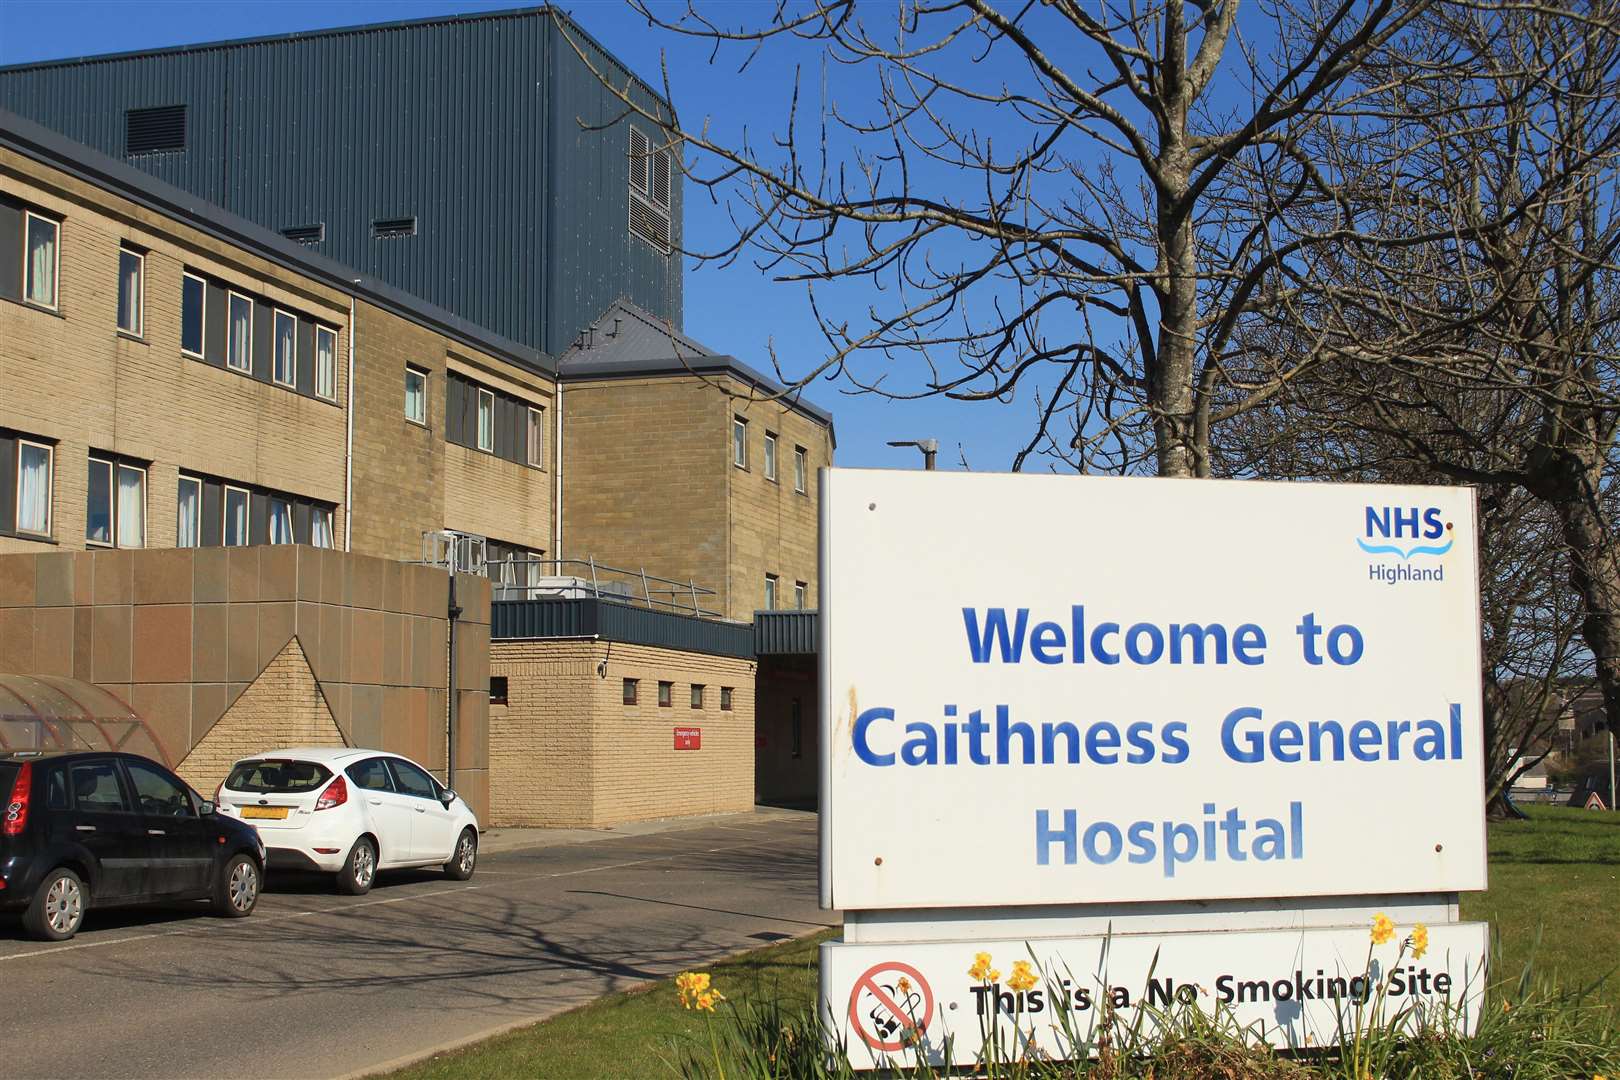 Some day surgeries could move from Raigmore to Caithness General Hospital in Wick.